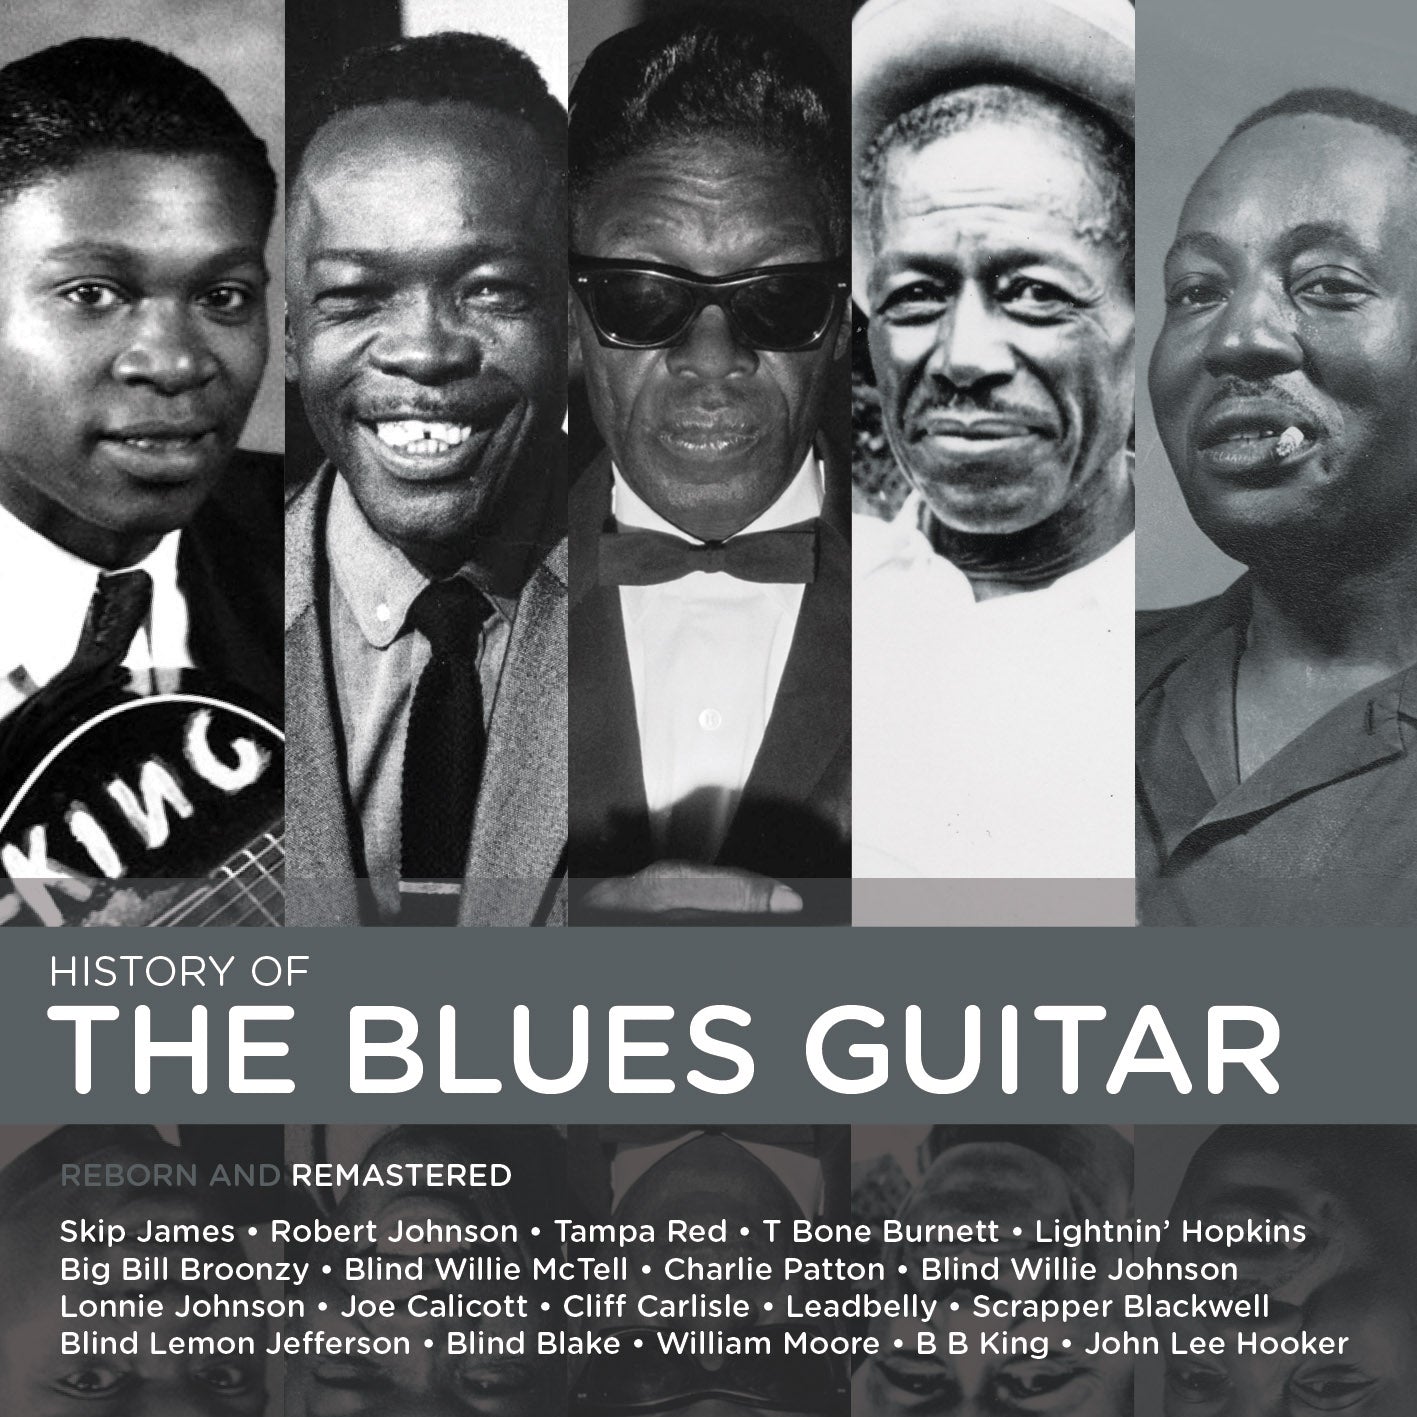 VARIOUS ARTISTS - HALL OF FAME: HISTORY OF THE BLUES GUITAR